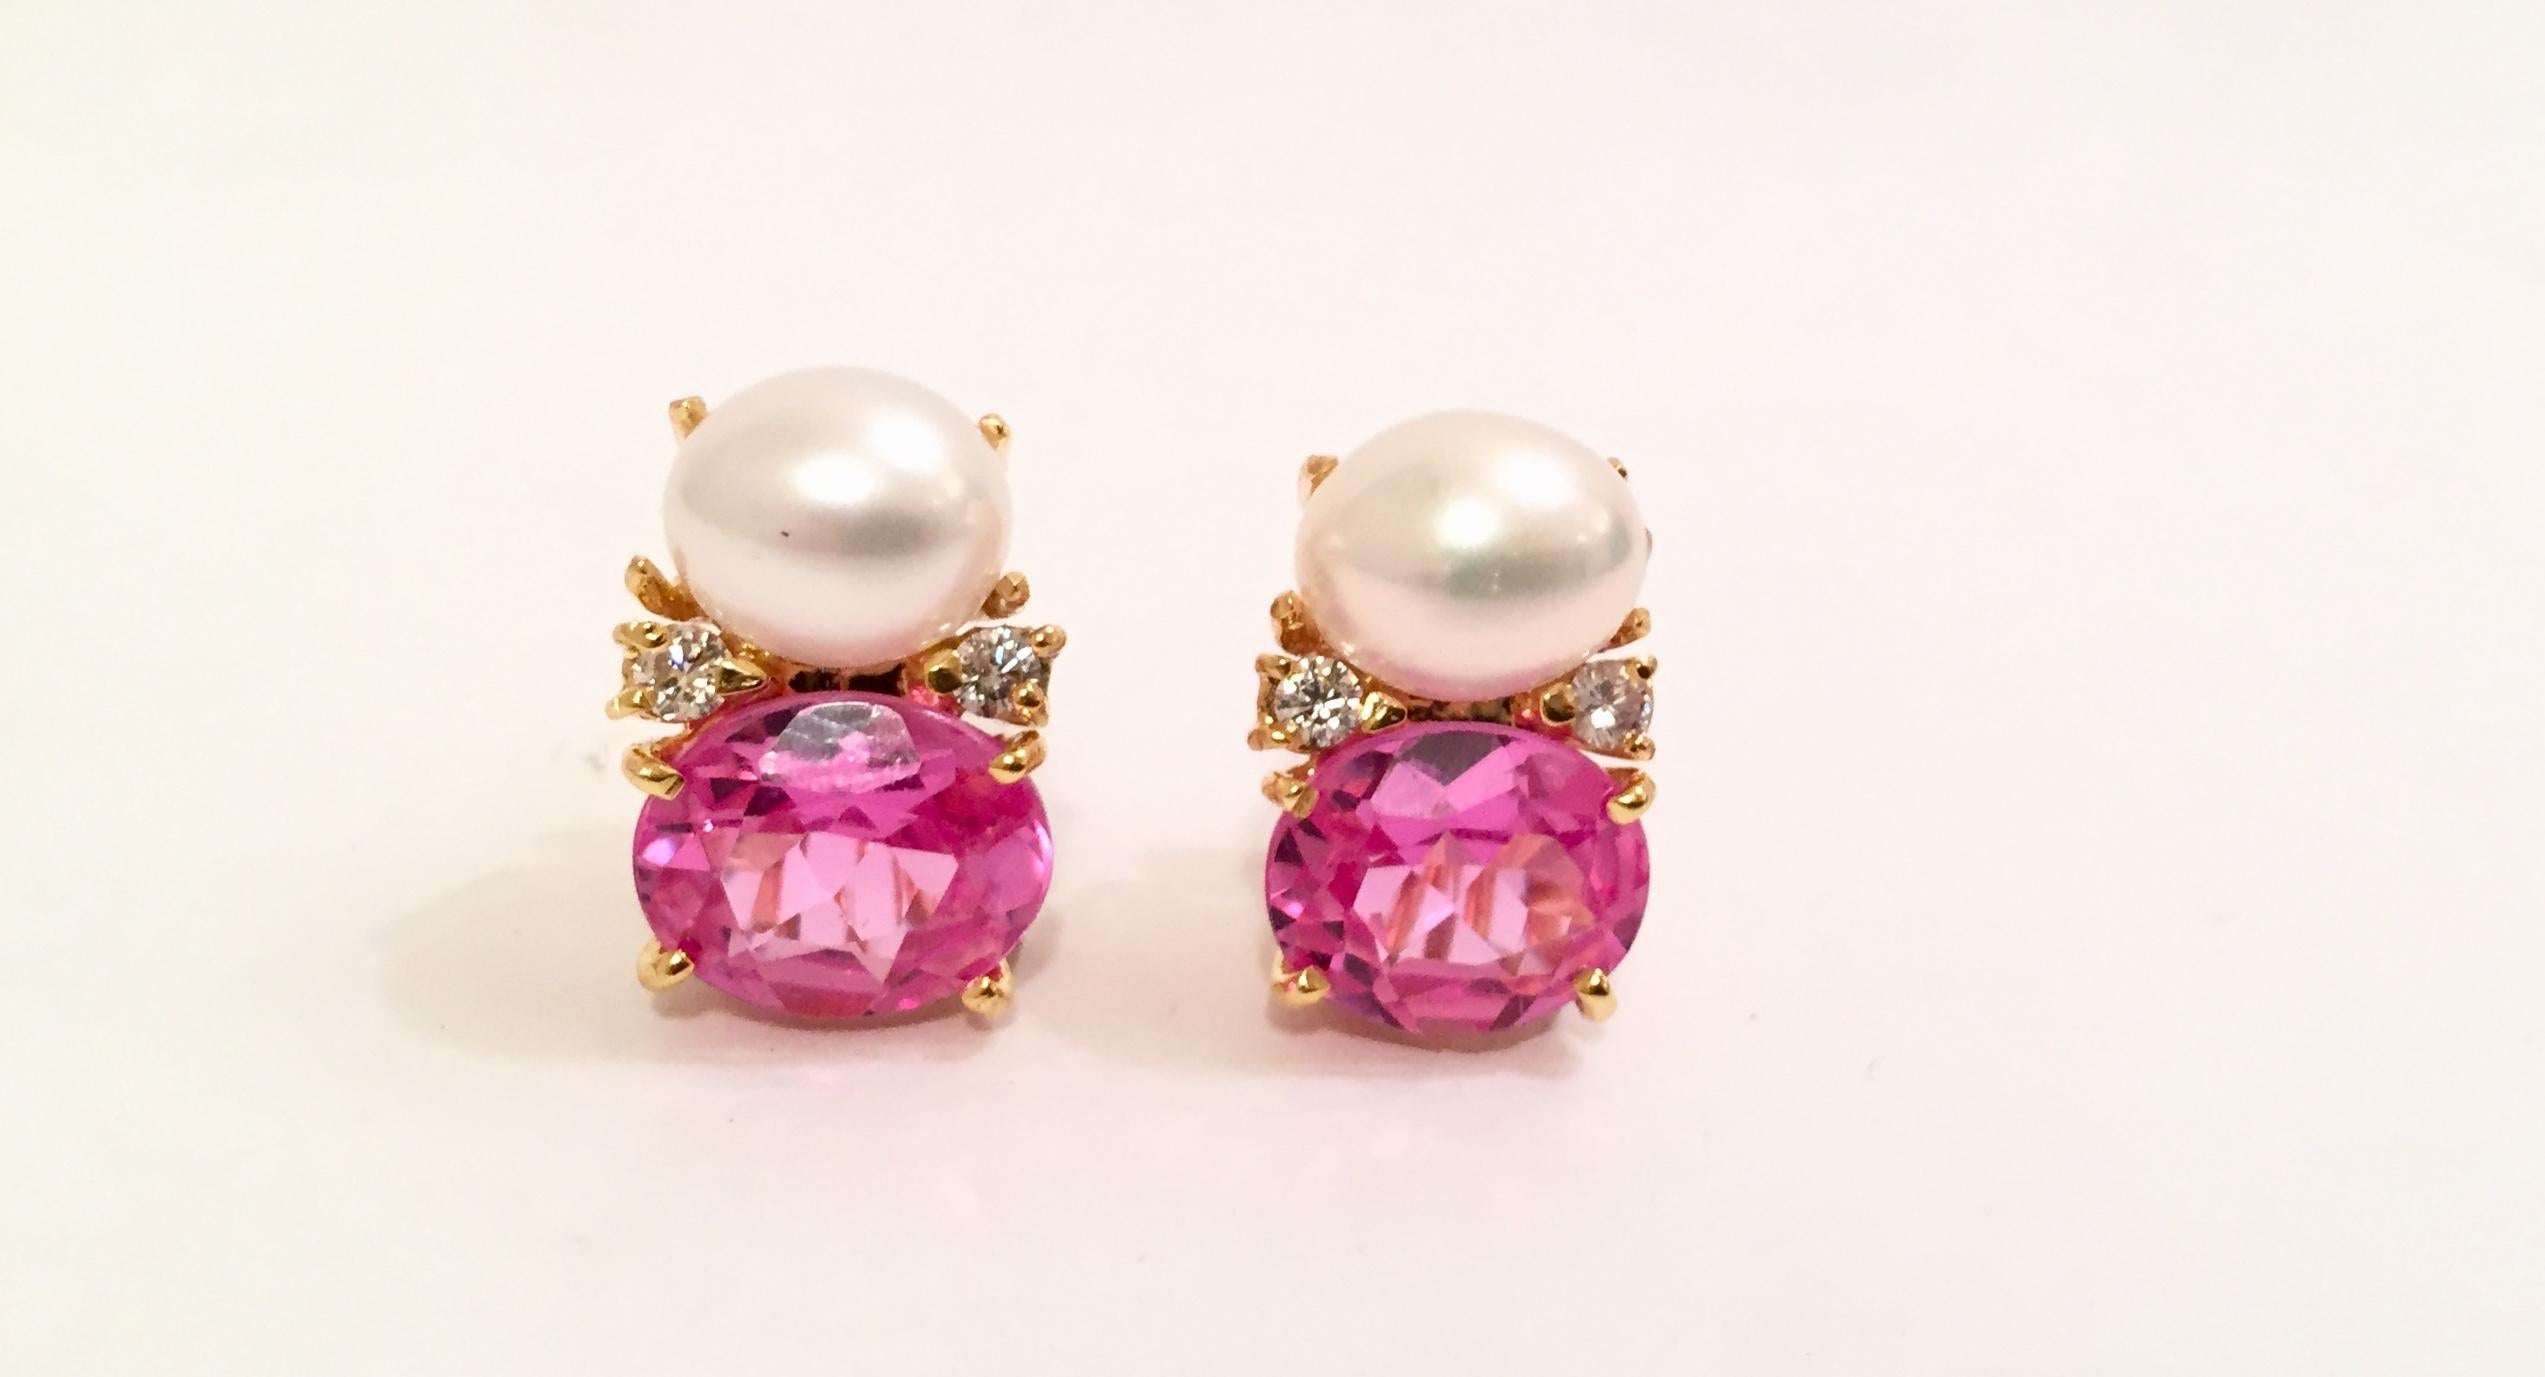 18kt Medium Gum Drop Earrings with Pearls and Pink Topaz and four Diamonds.

The Medium 18kt yellow gold GUM DROP™ earrings hosts a freshwater Pearl and faceted Pink Topaz (approximately 5 cts each) and 4 diamonds weighing ~0.40 cts.